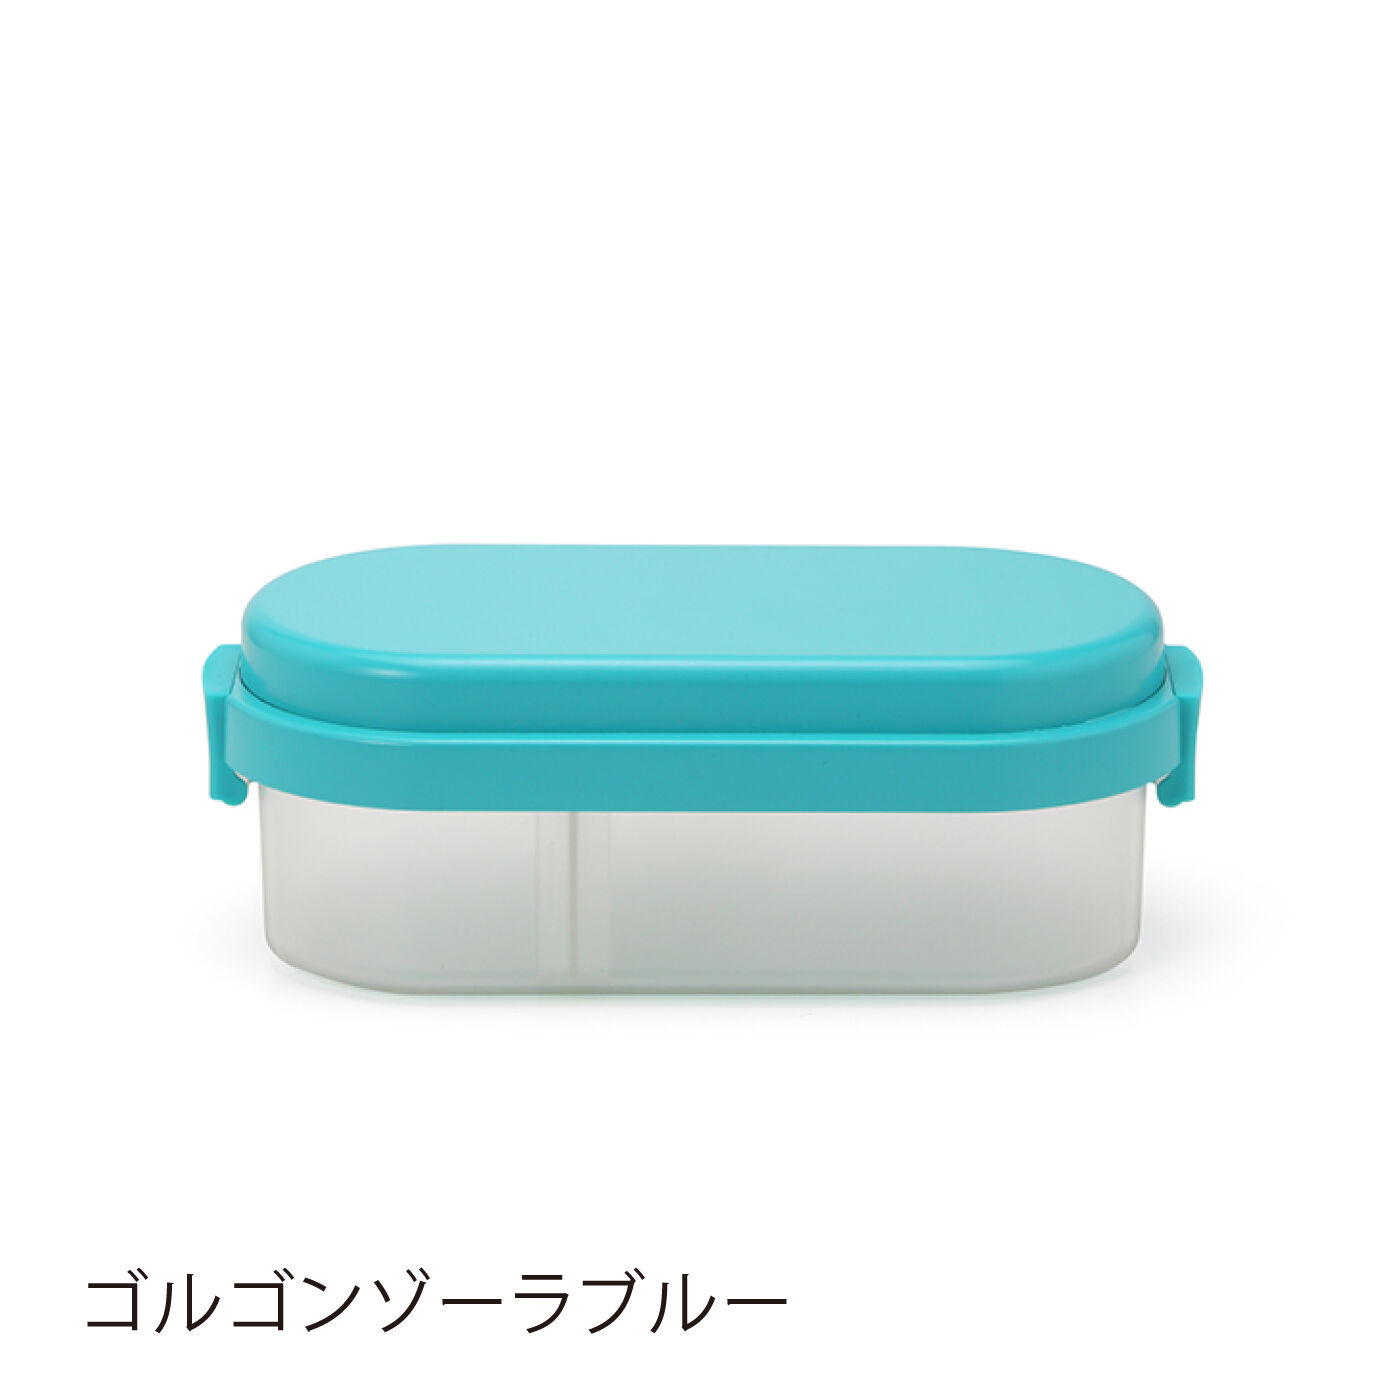 FELISSIMO PARTNERS|GEL-COOL plus dome Mサイズ CLEAR LUNCH BOX